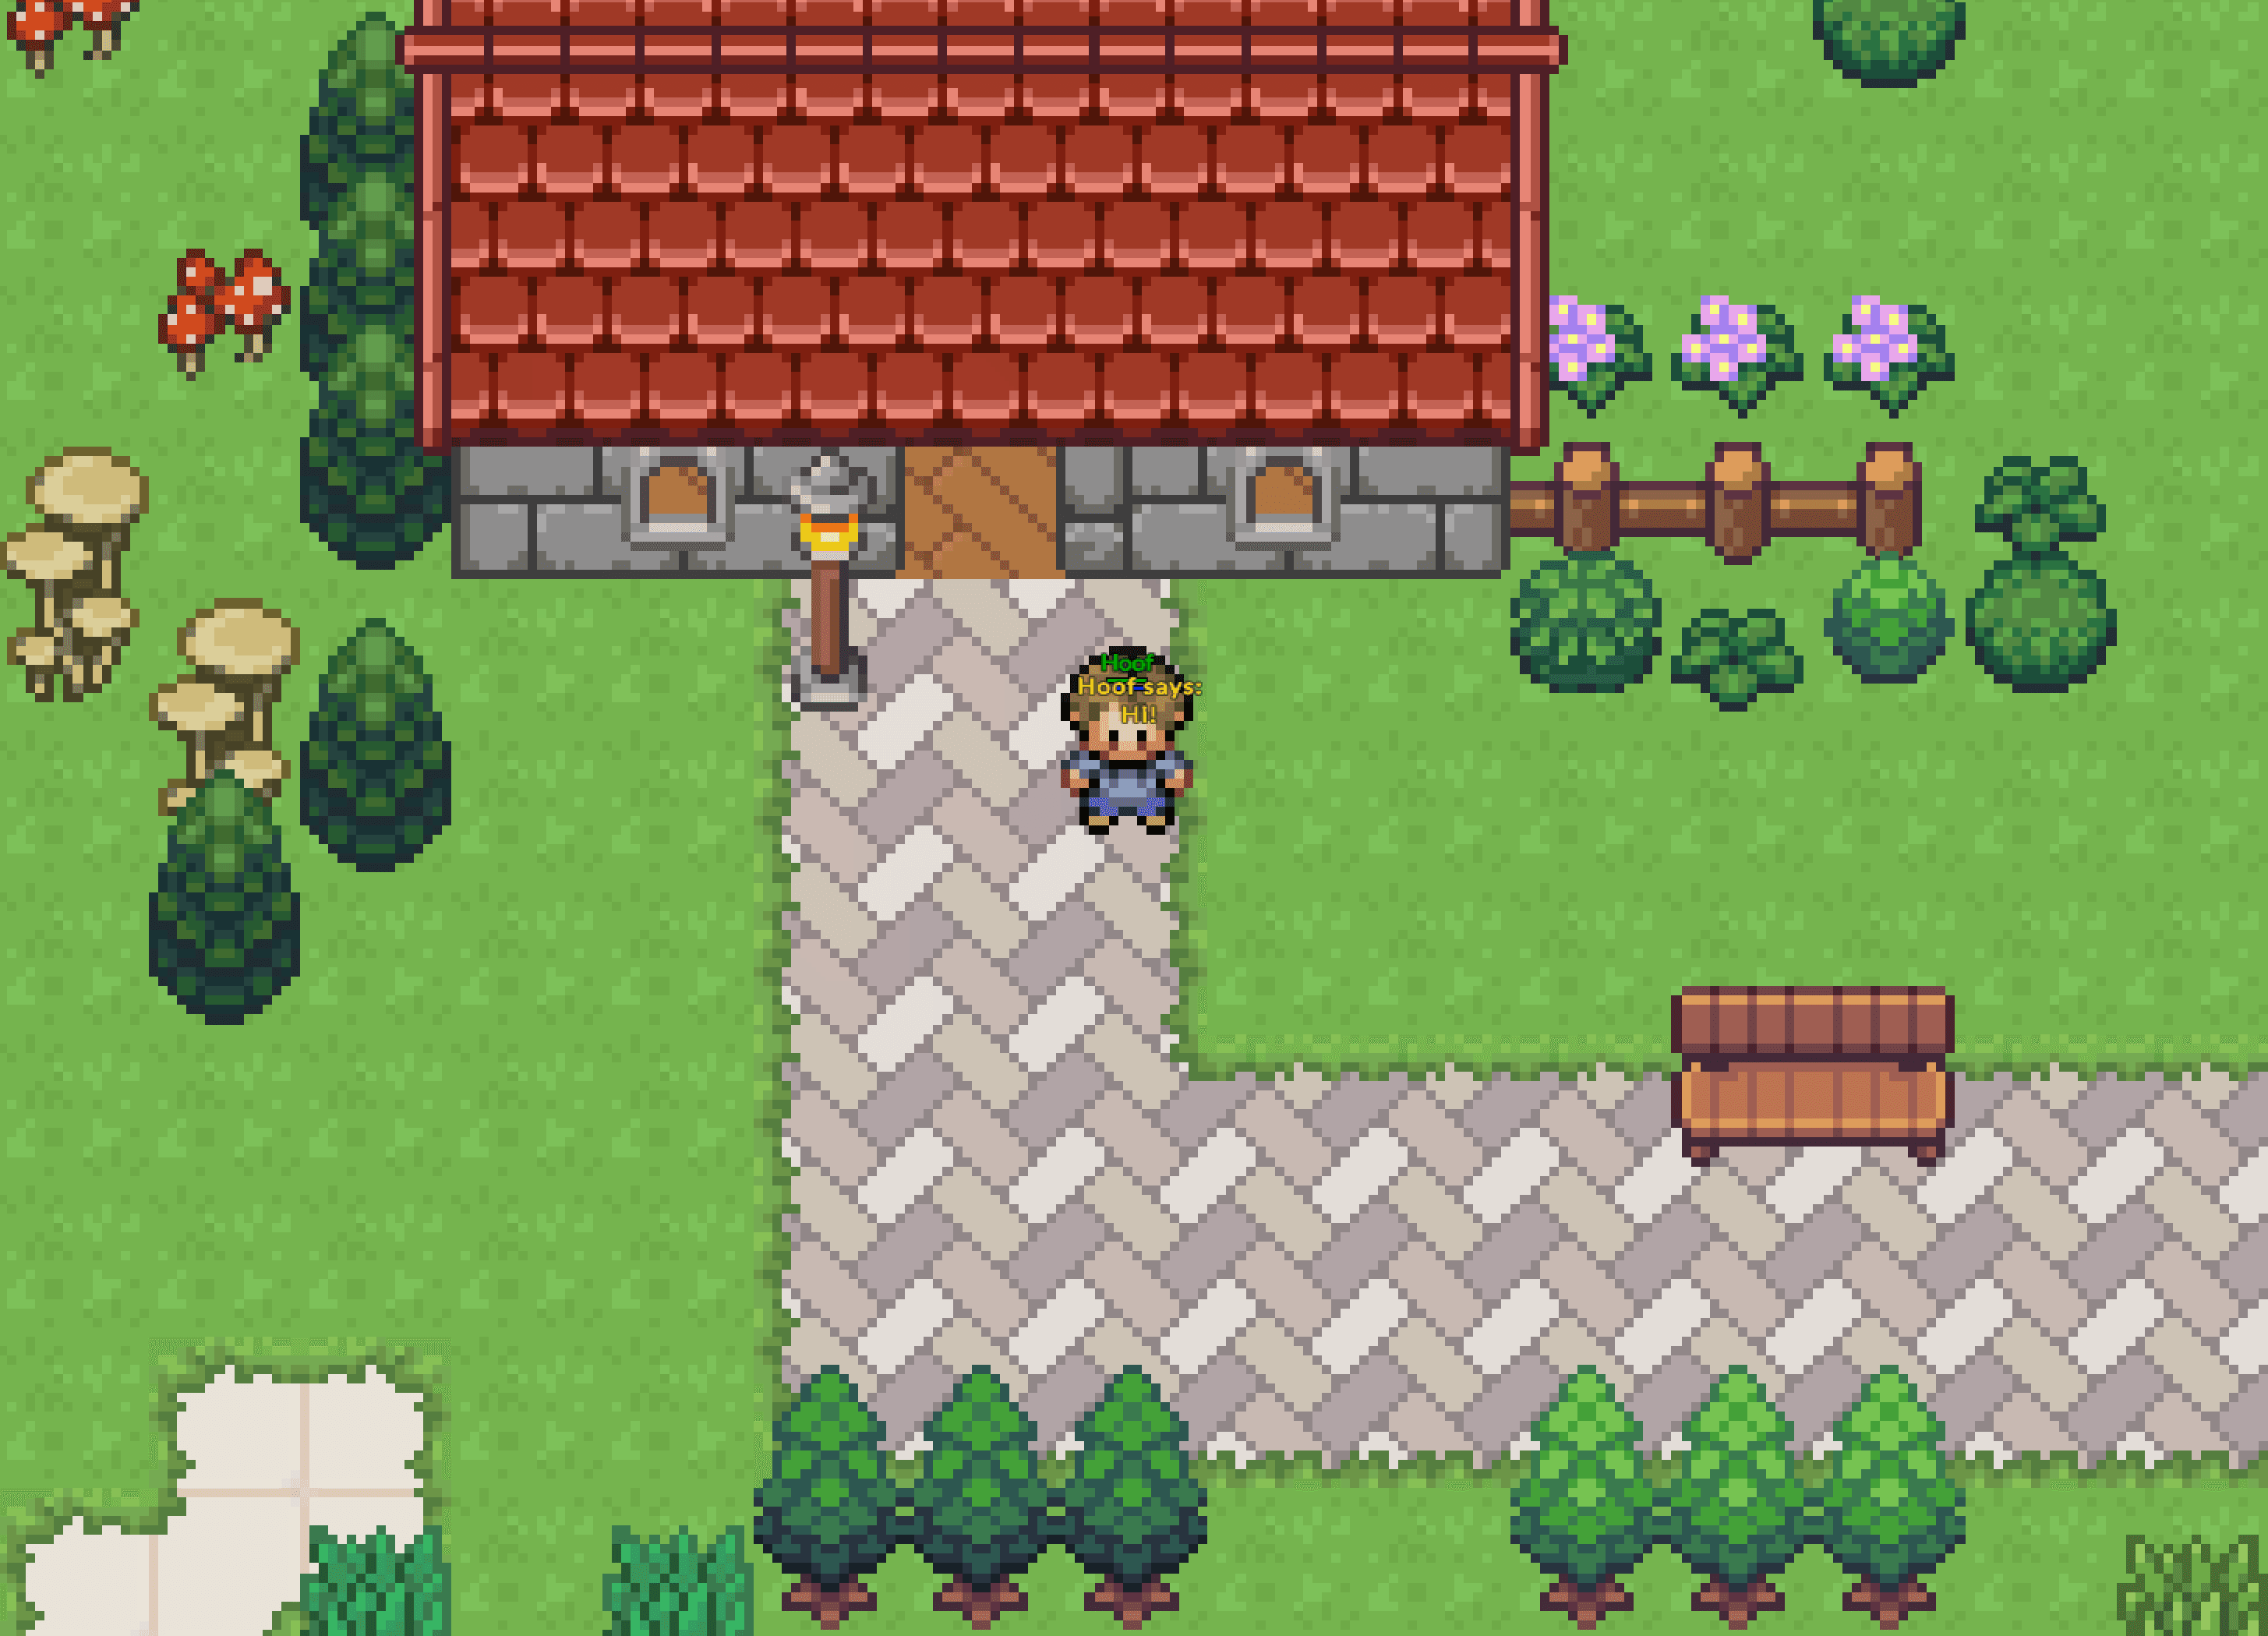 Player's character chatting in front of a pixel art brick house